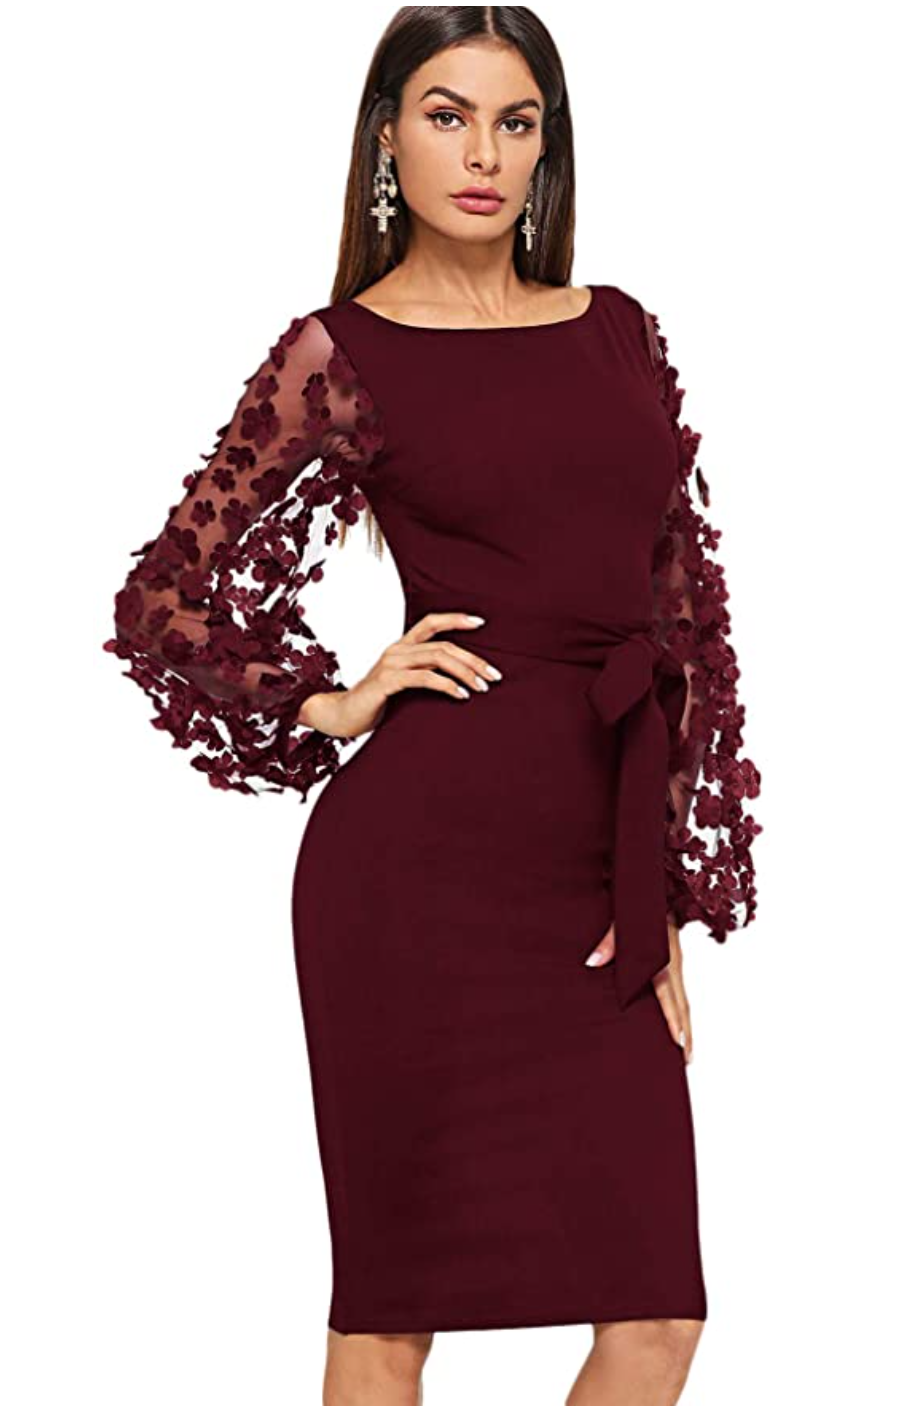 Fall Wedding Guest Outfits - Addicted To 2 Day Shipping